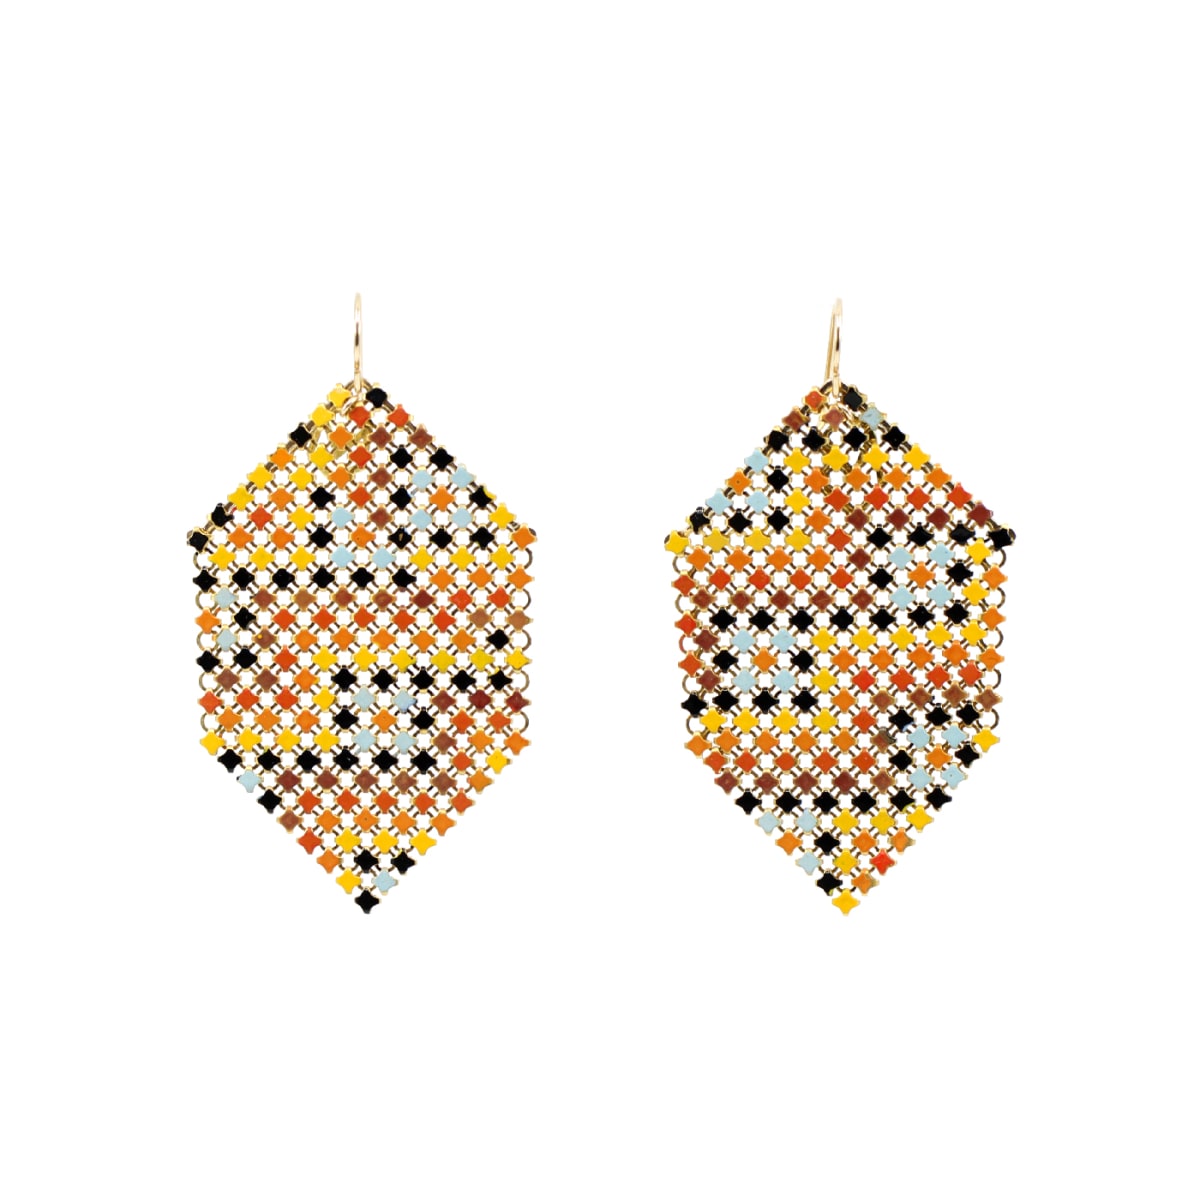 FESTIVAL MESH EARRINGS by Maral Rapp  Image: Bright, colorful earrings featuring metal mesh from a vintage/antique, hand-enameled flapper purse (circa 1920-1930s.)